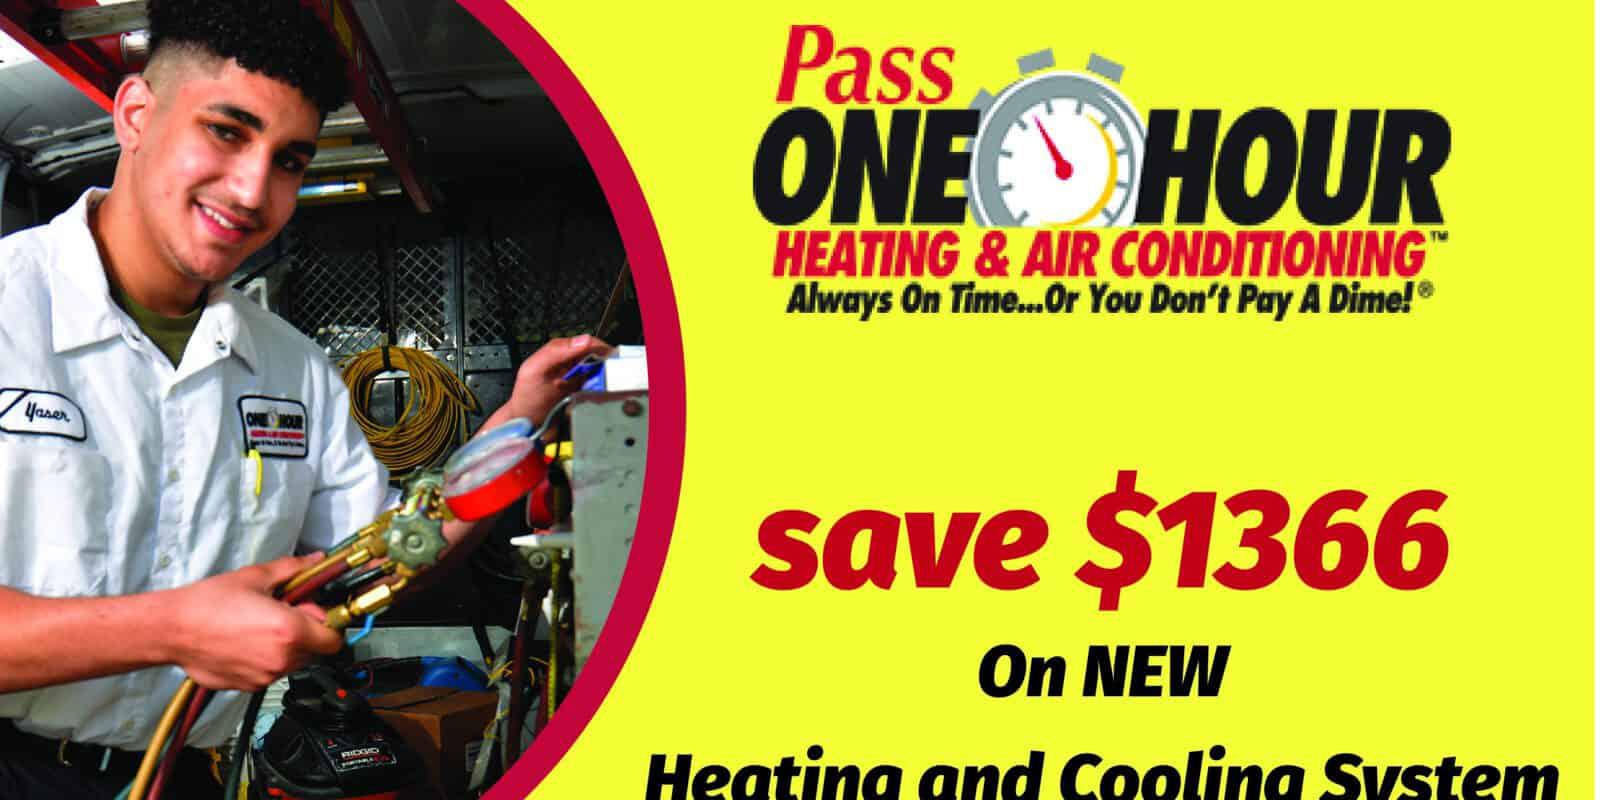 Be one of 46 people to save $1,366 on a new heating and air conditioning system.